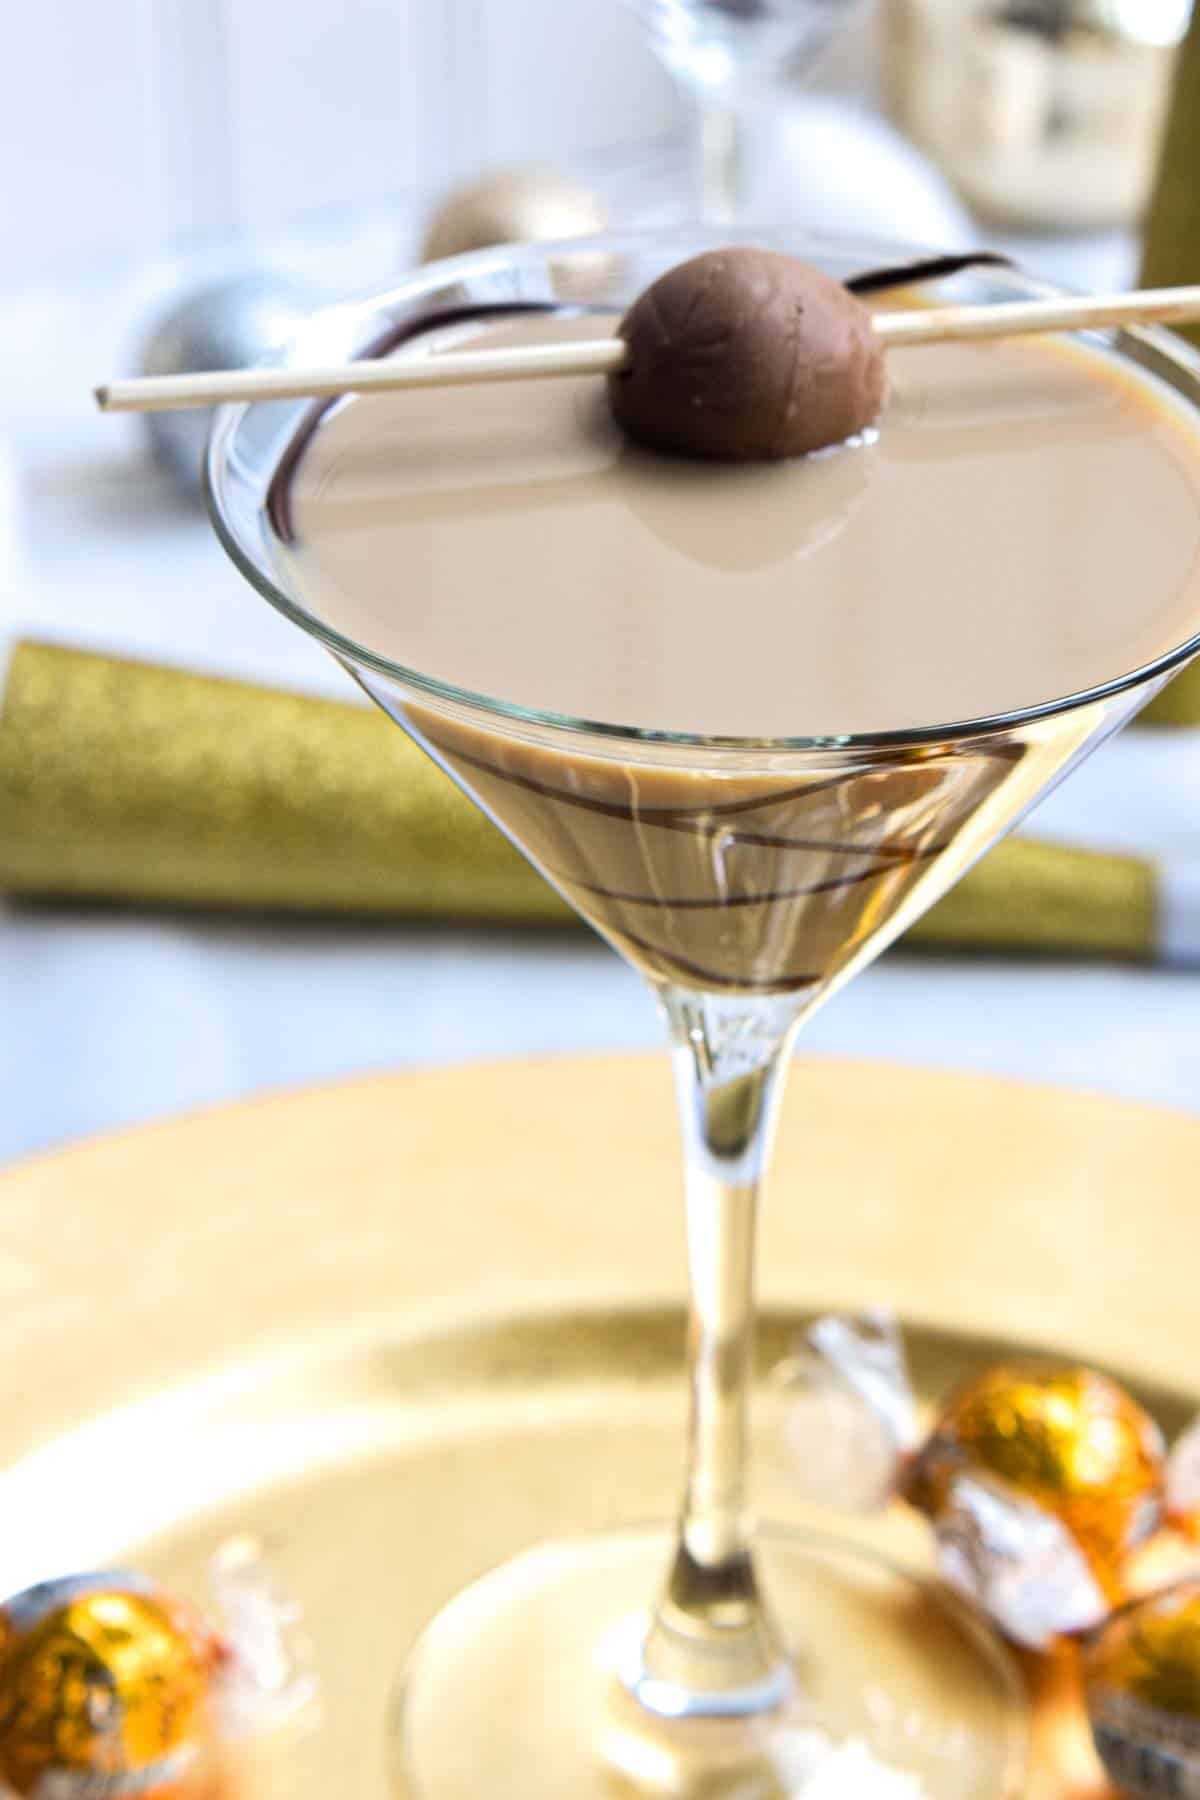 A chocolate martini with chocolate and a candy cane on a gold plate.